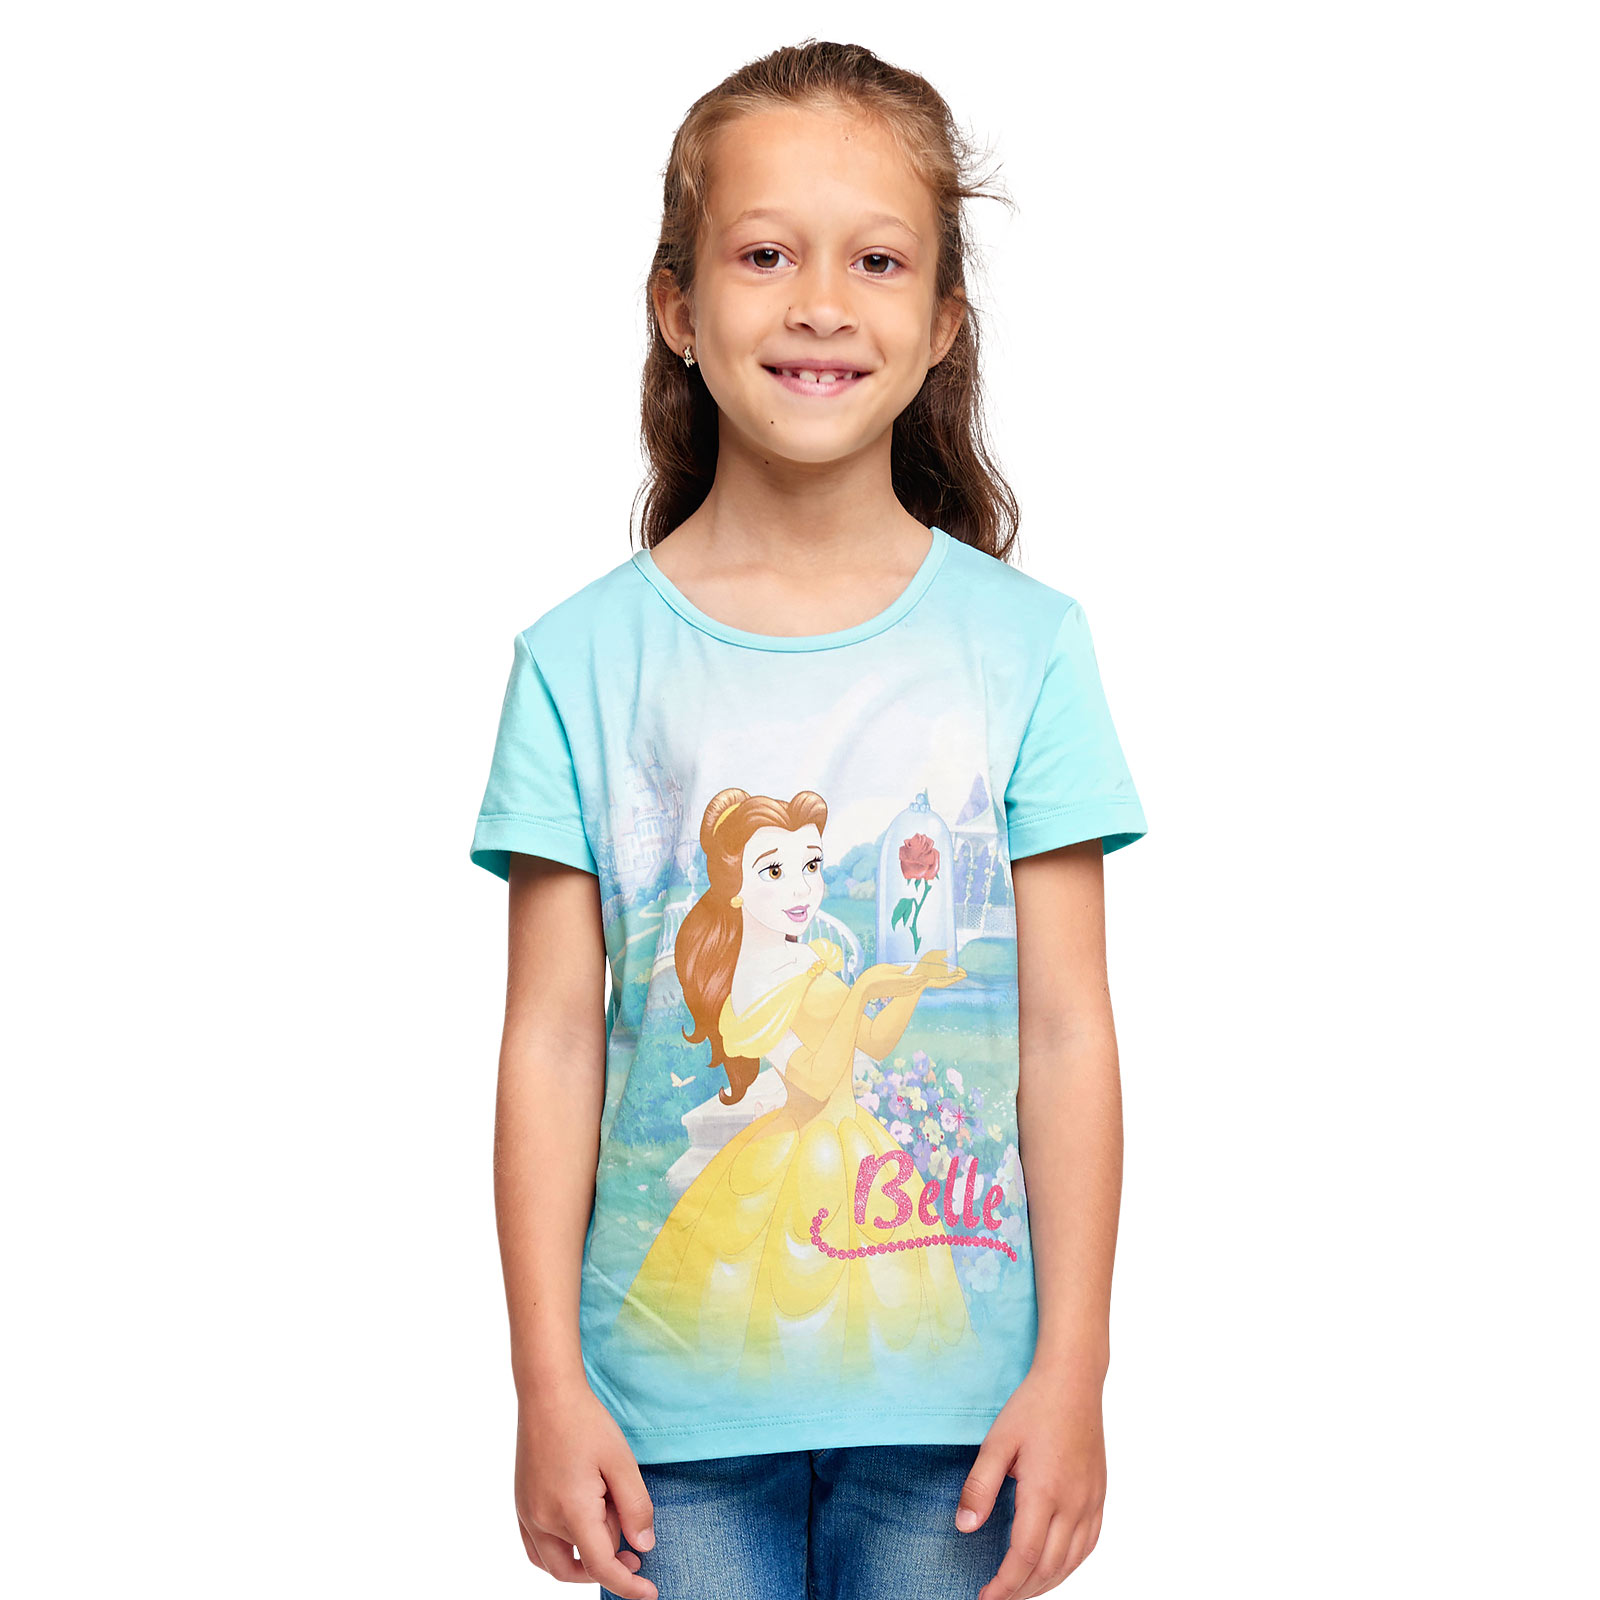 Beauty and the Beast - Belle Children's T-Shirt Turquoise